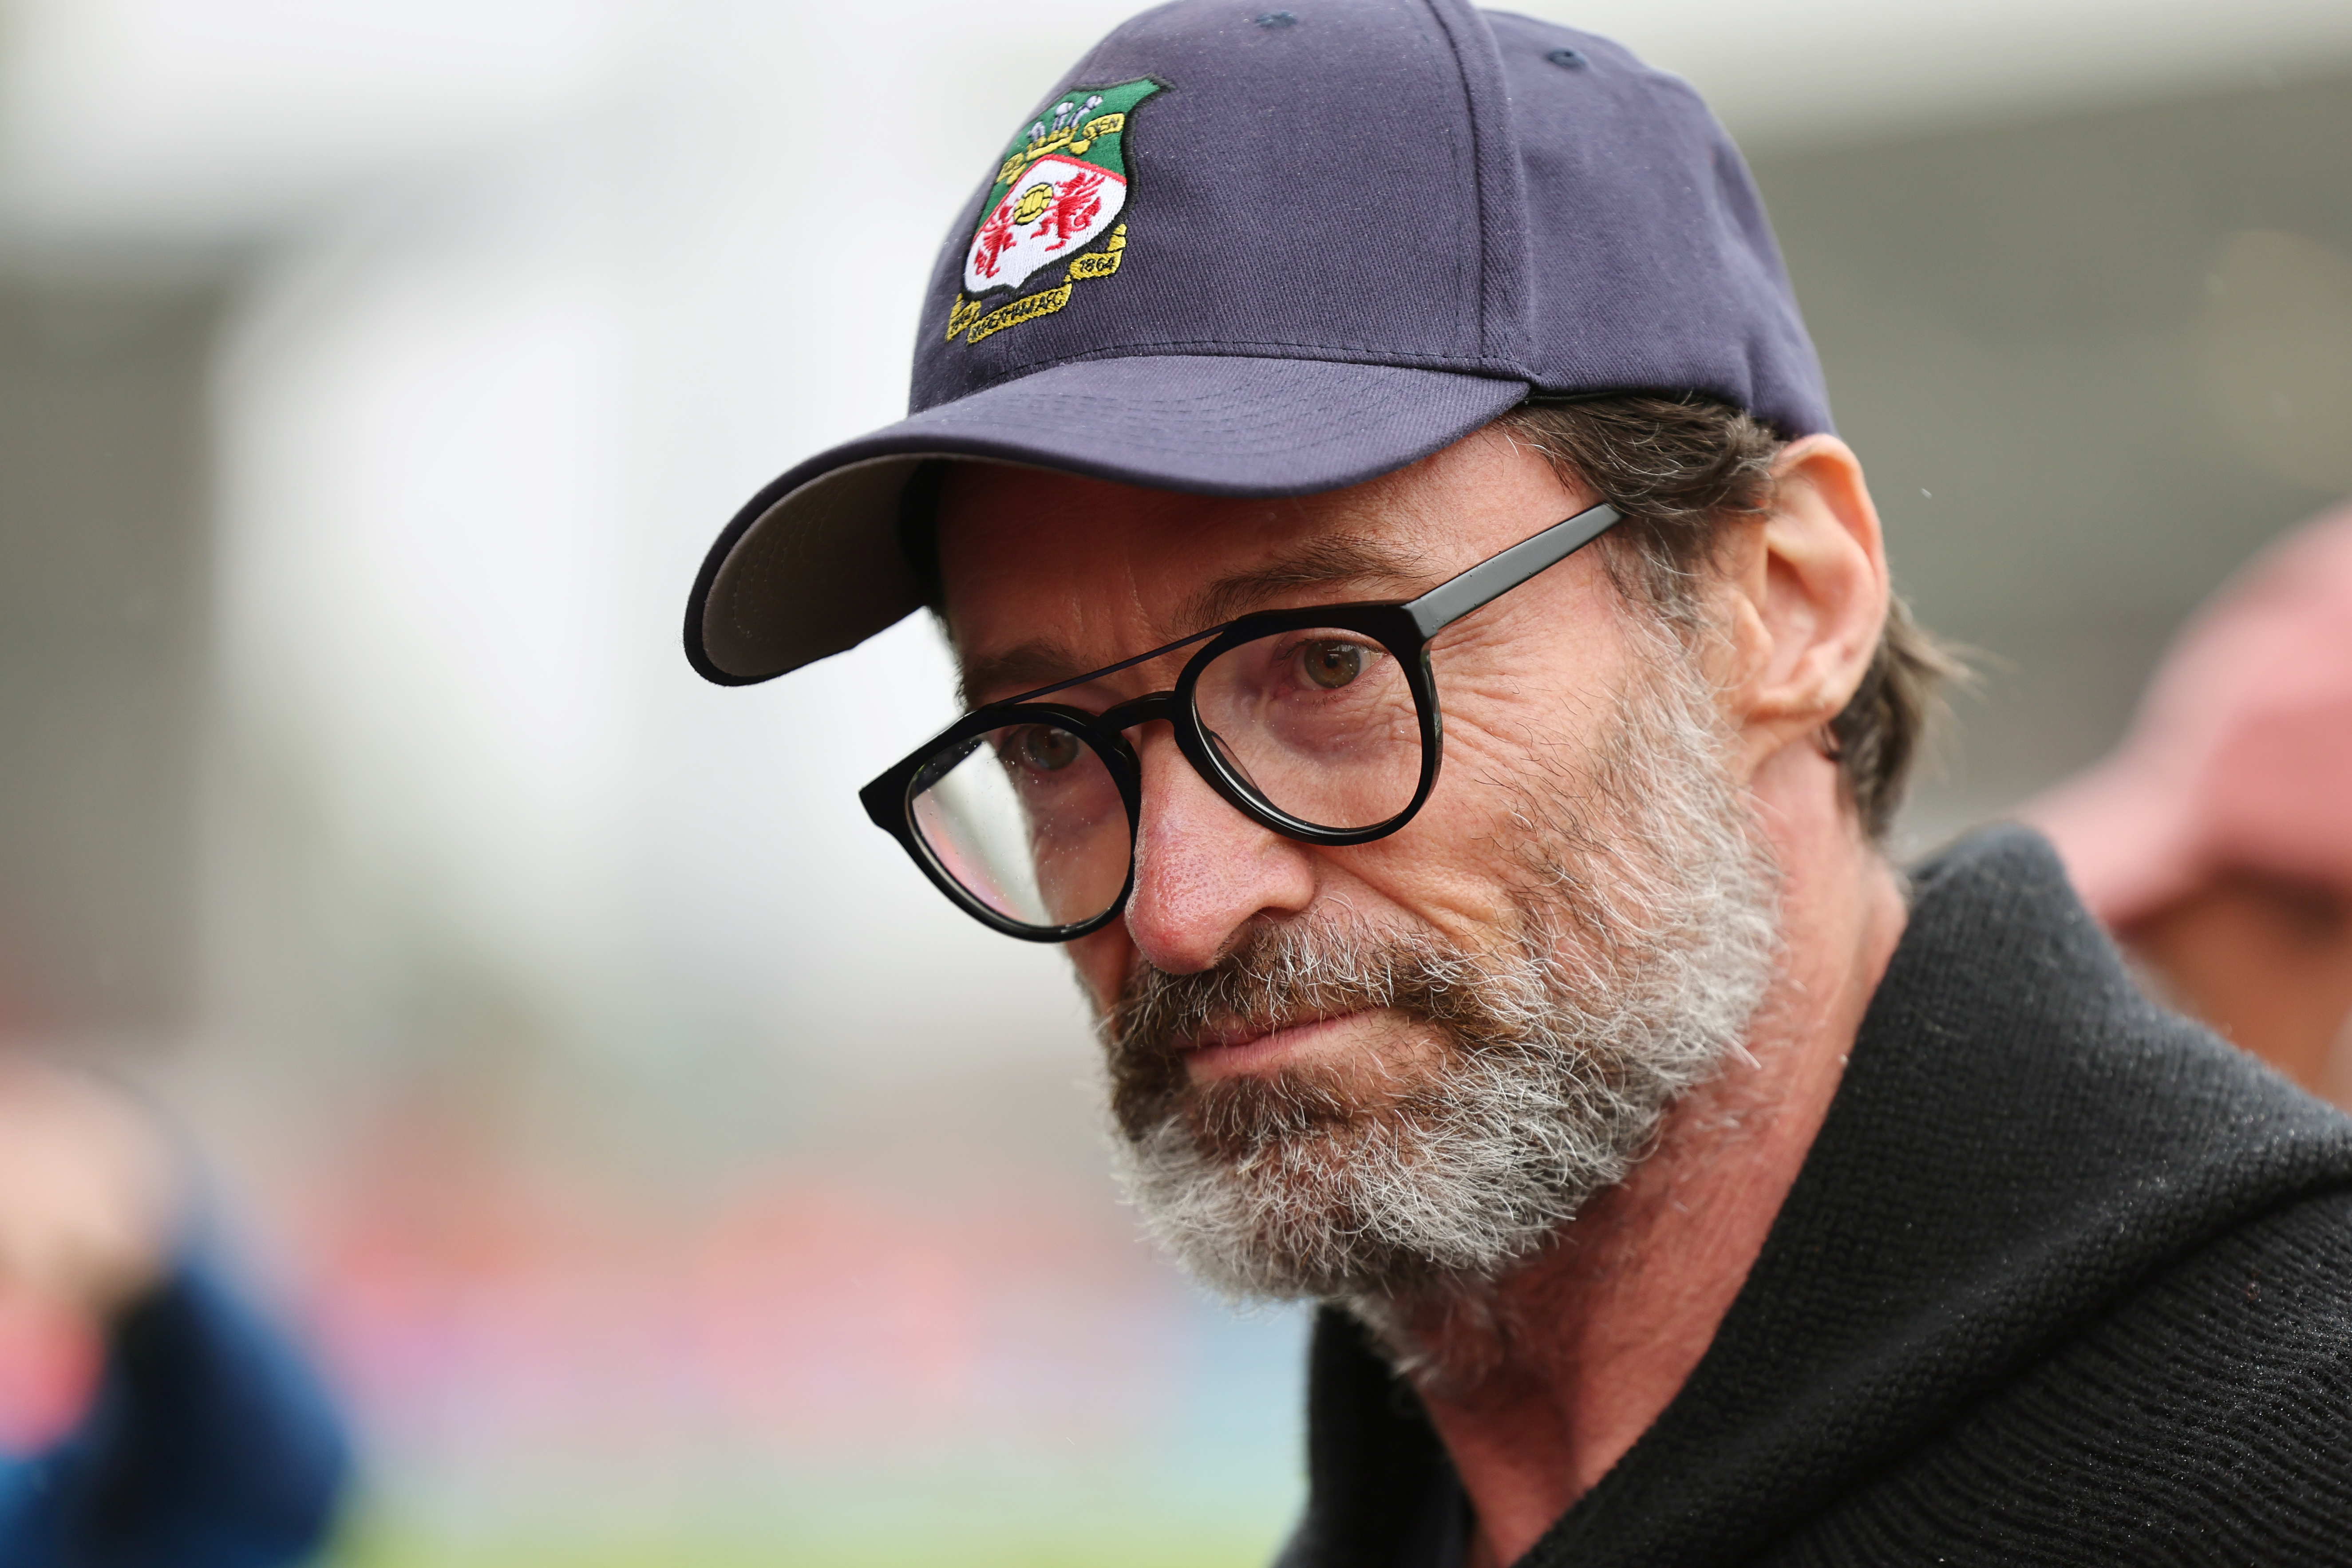 Hugh Jackman at the Sky Bet League Two match between Wrexham and Milton Keynes Dons in Wrexham, Wales on August 5, 2023 | Source: Getty Images